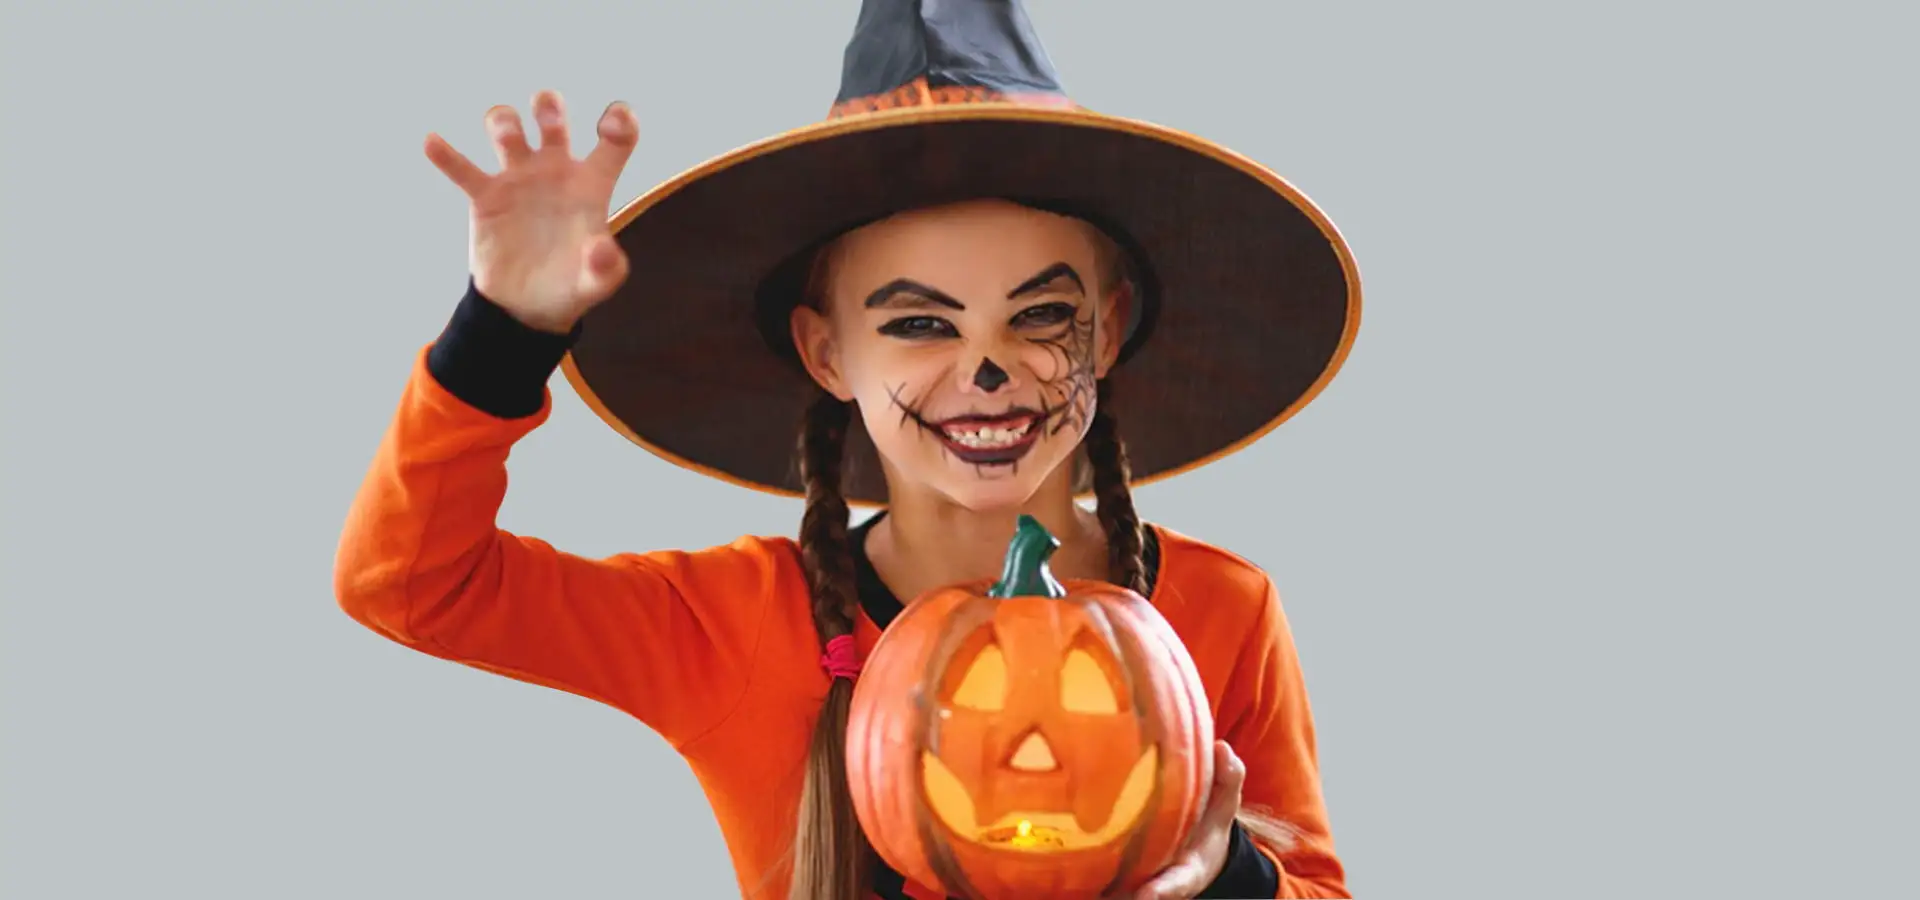 Examples of Halloween makeup for kids, perfect for parties, events, and themed celebrations.